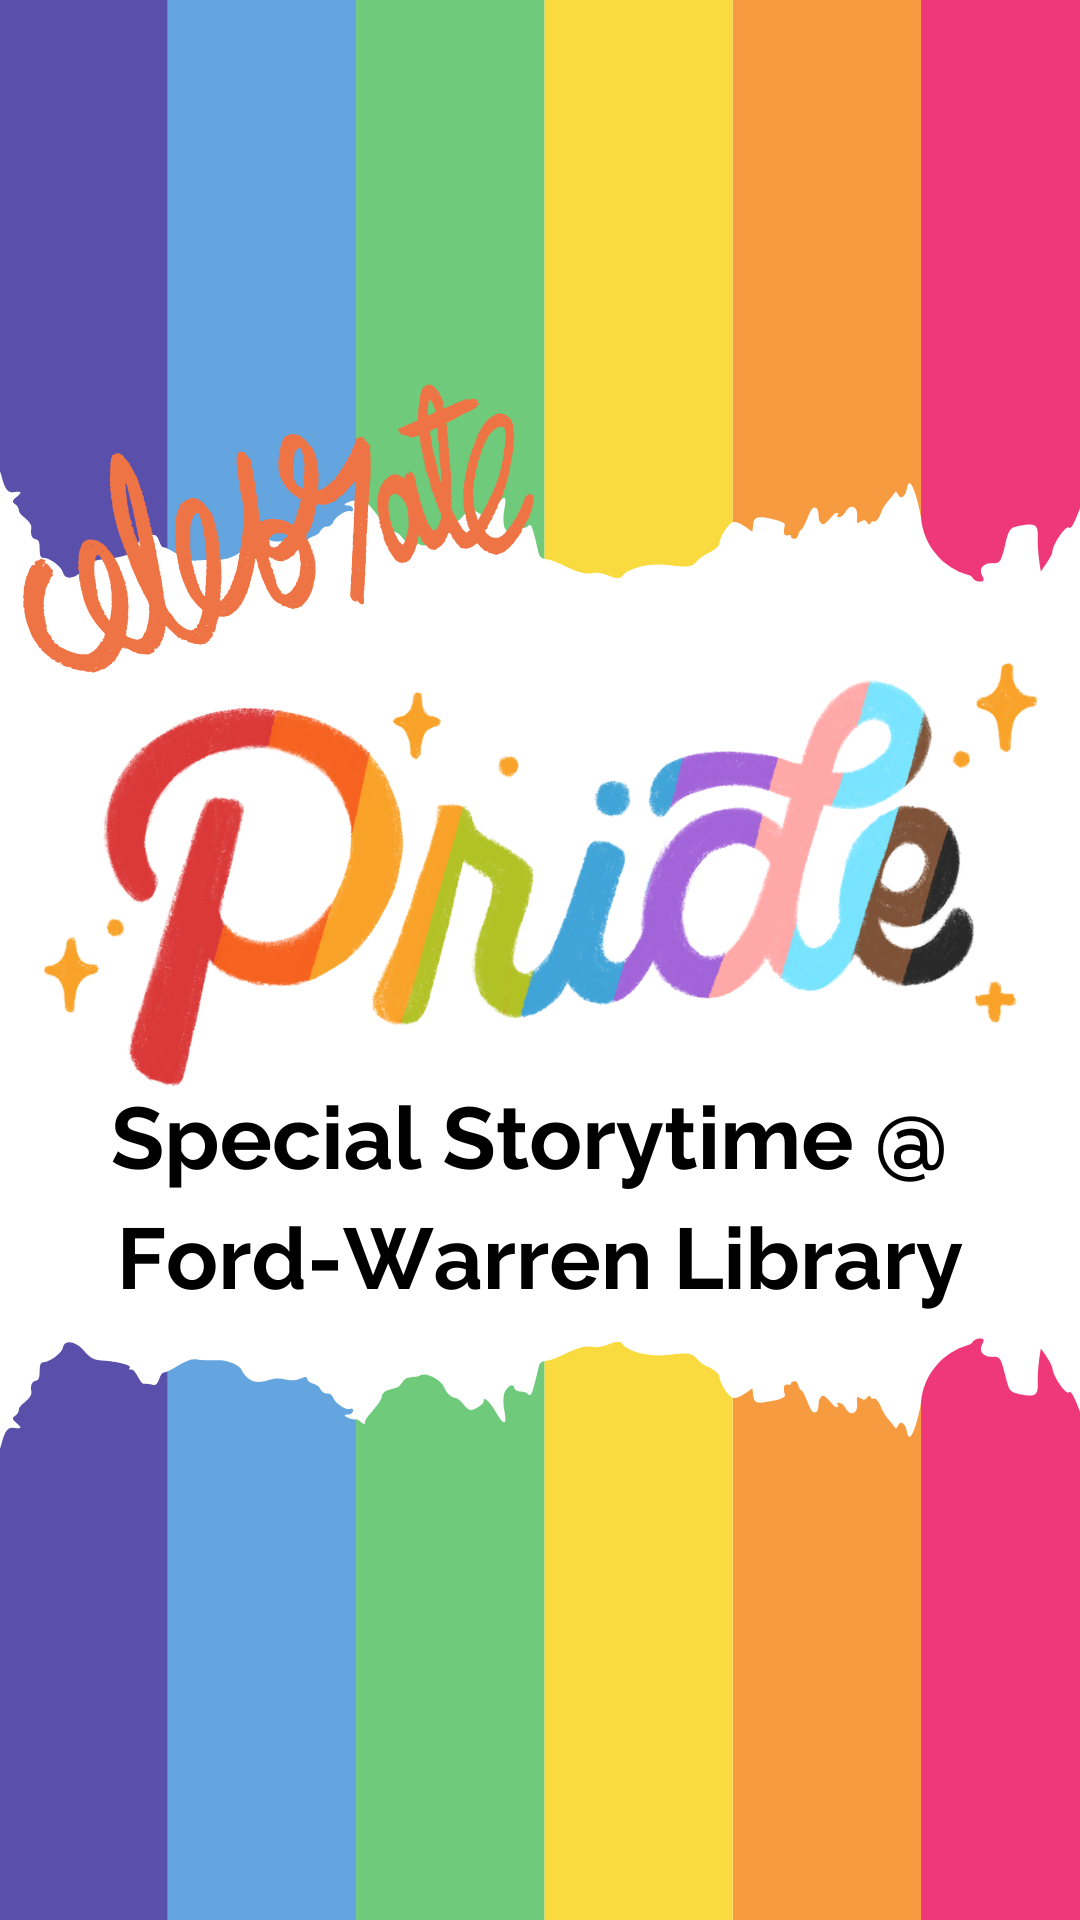 Text: Celebrate Pride, special Storytime At Ford-Warren Branch Library, with rainbow background